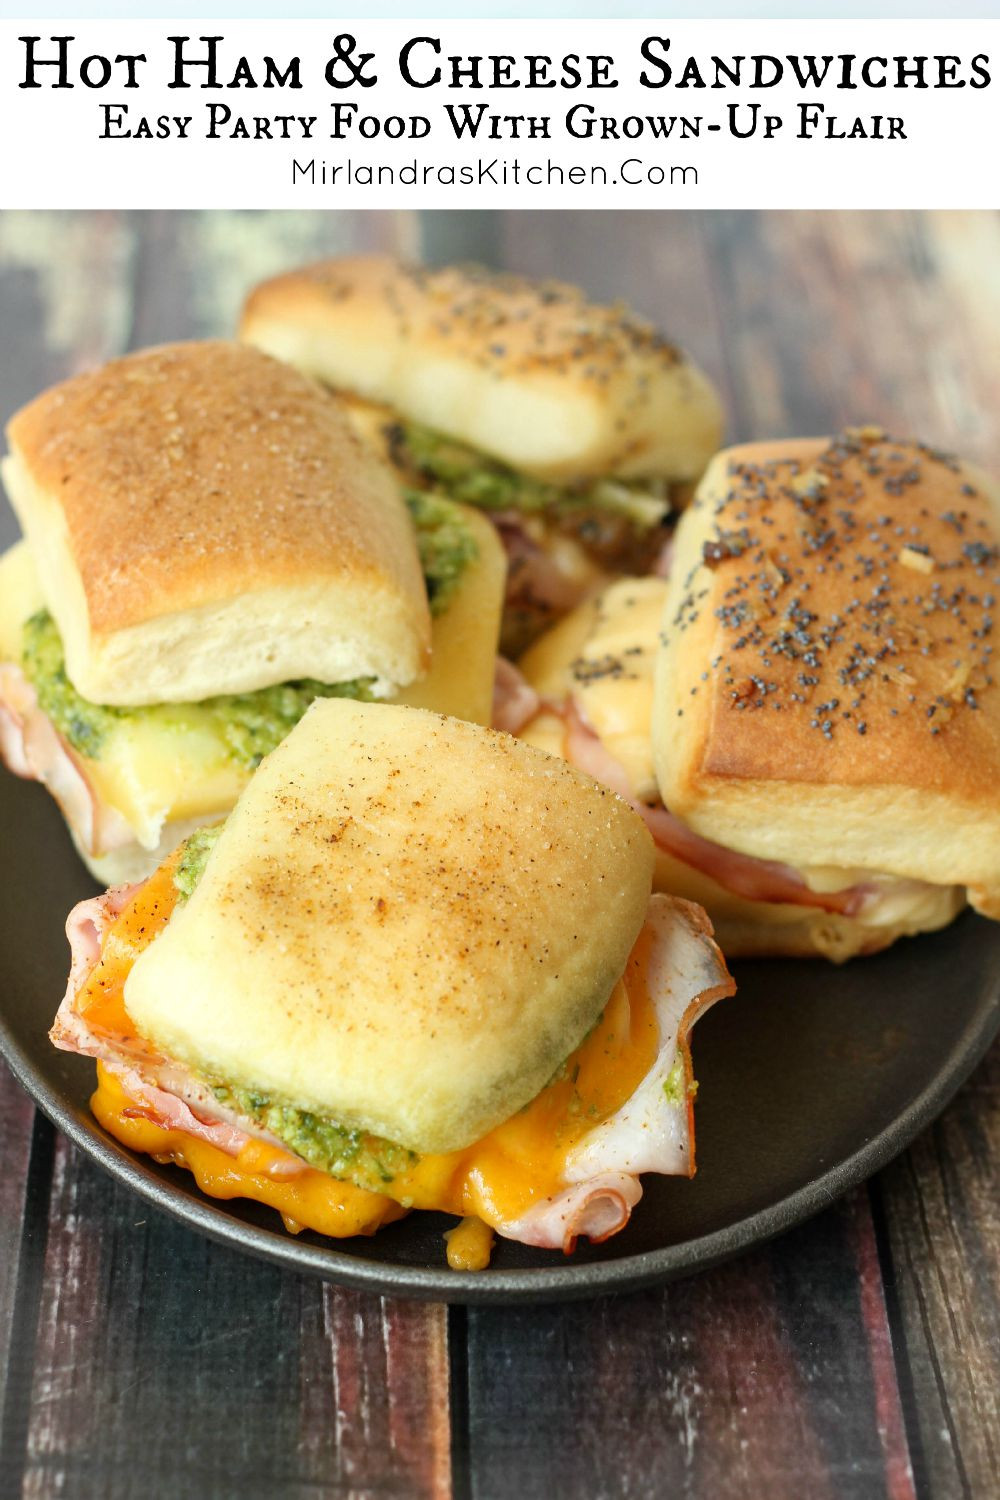 Hot Ham Sandwich Recipes
 Hot Ham & Cheese Sandwiches Easy Party Food With Grown Up